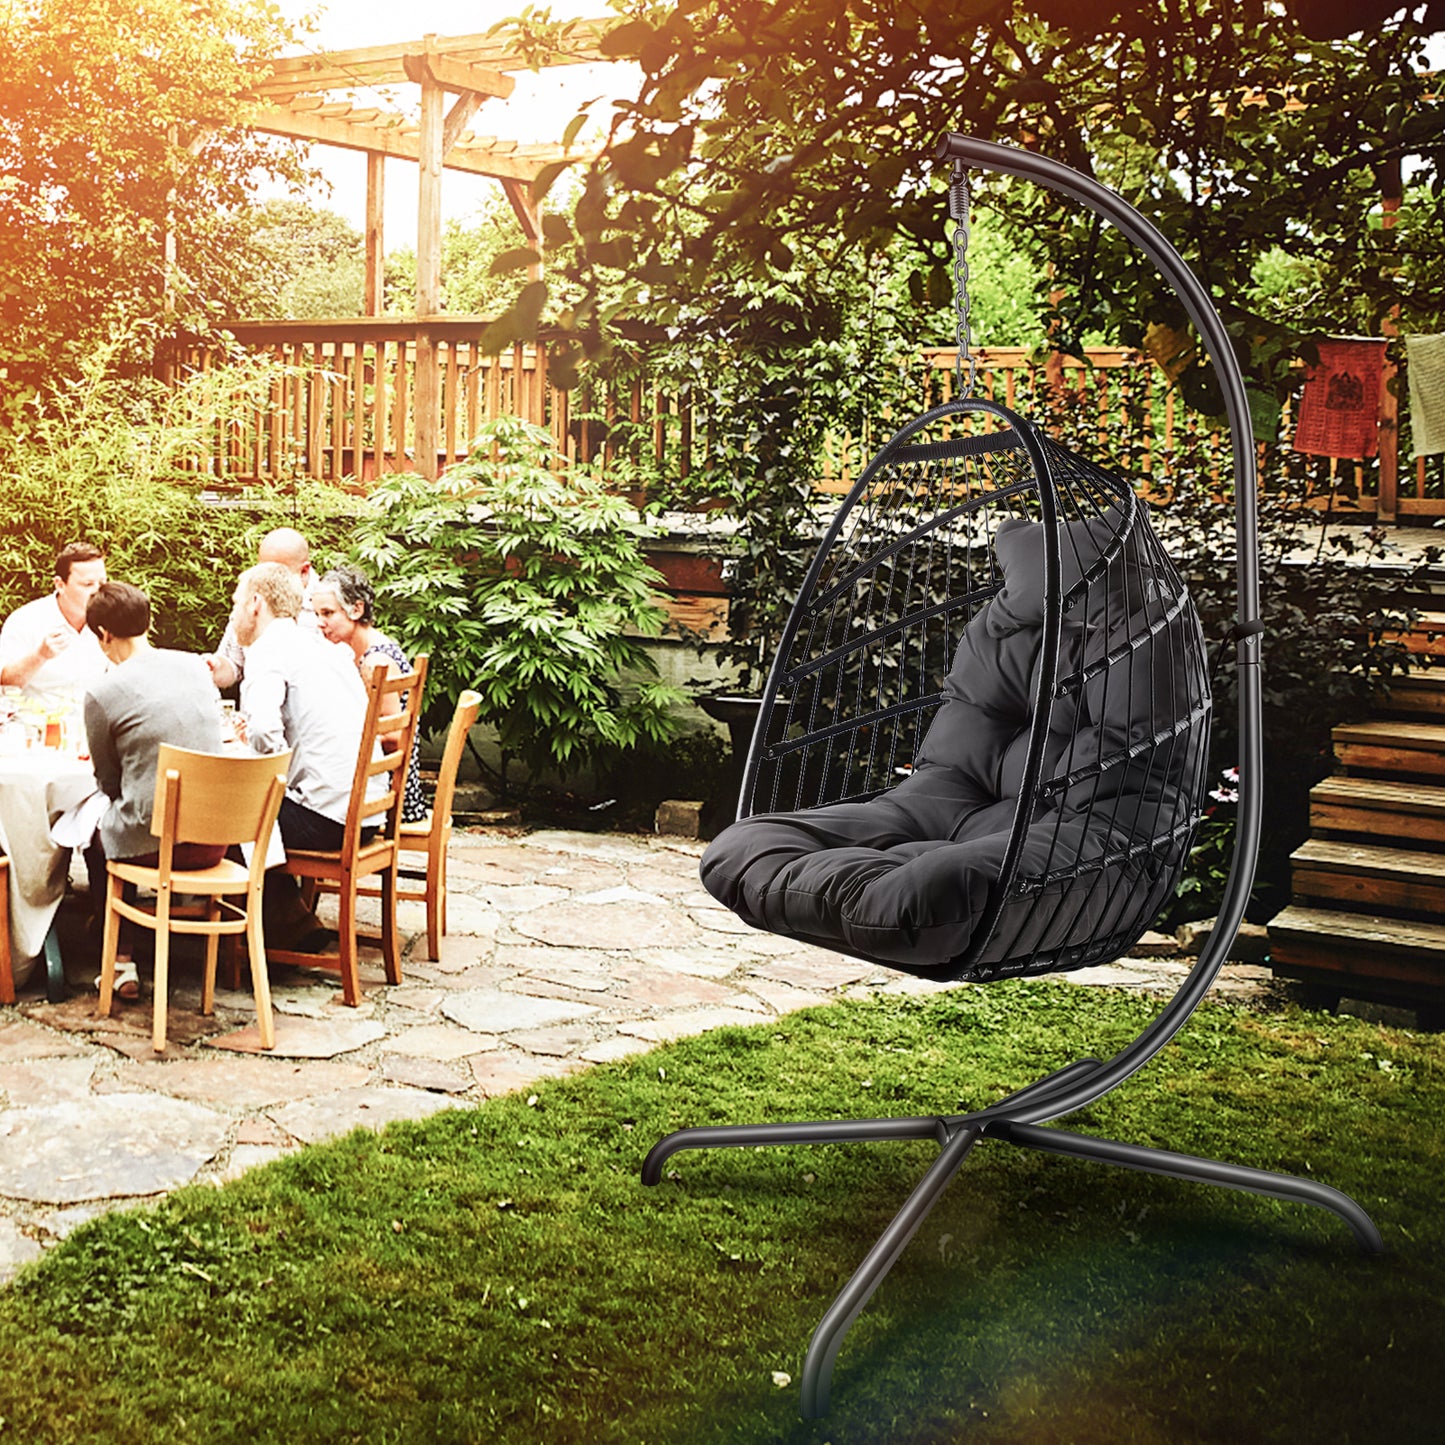 Swing Egg Chair with Stand Indoor Outdoor Wicker Rattan Patio Basket Hanging Chair with C Type bracket , with cushion and pillow,Patio Wicker folding Hanging Chair( Black New arrivals within 10 days)